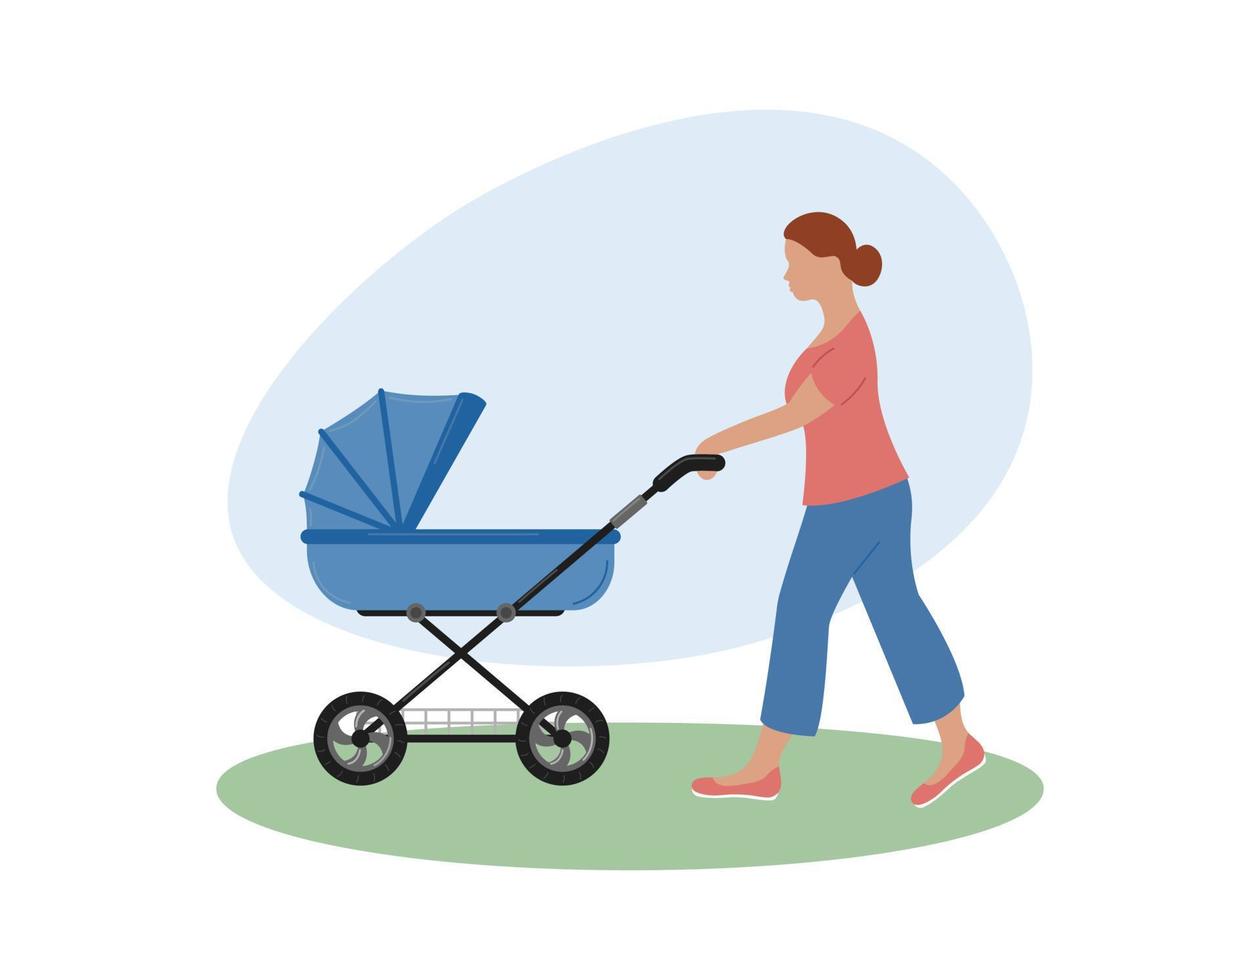 Mother walks with baby stroller in summer. Woman pushing pram for newborn, carriage for little child. Young mother walking with baby in park. Flat vector illustration